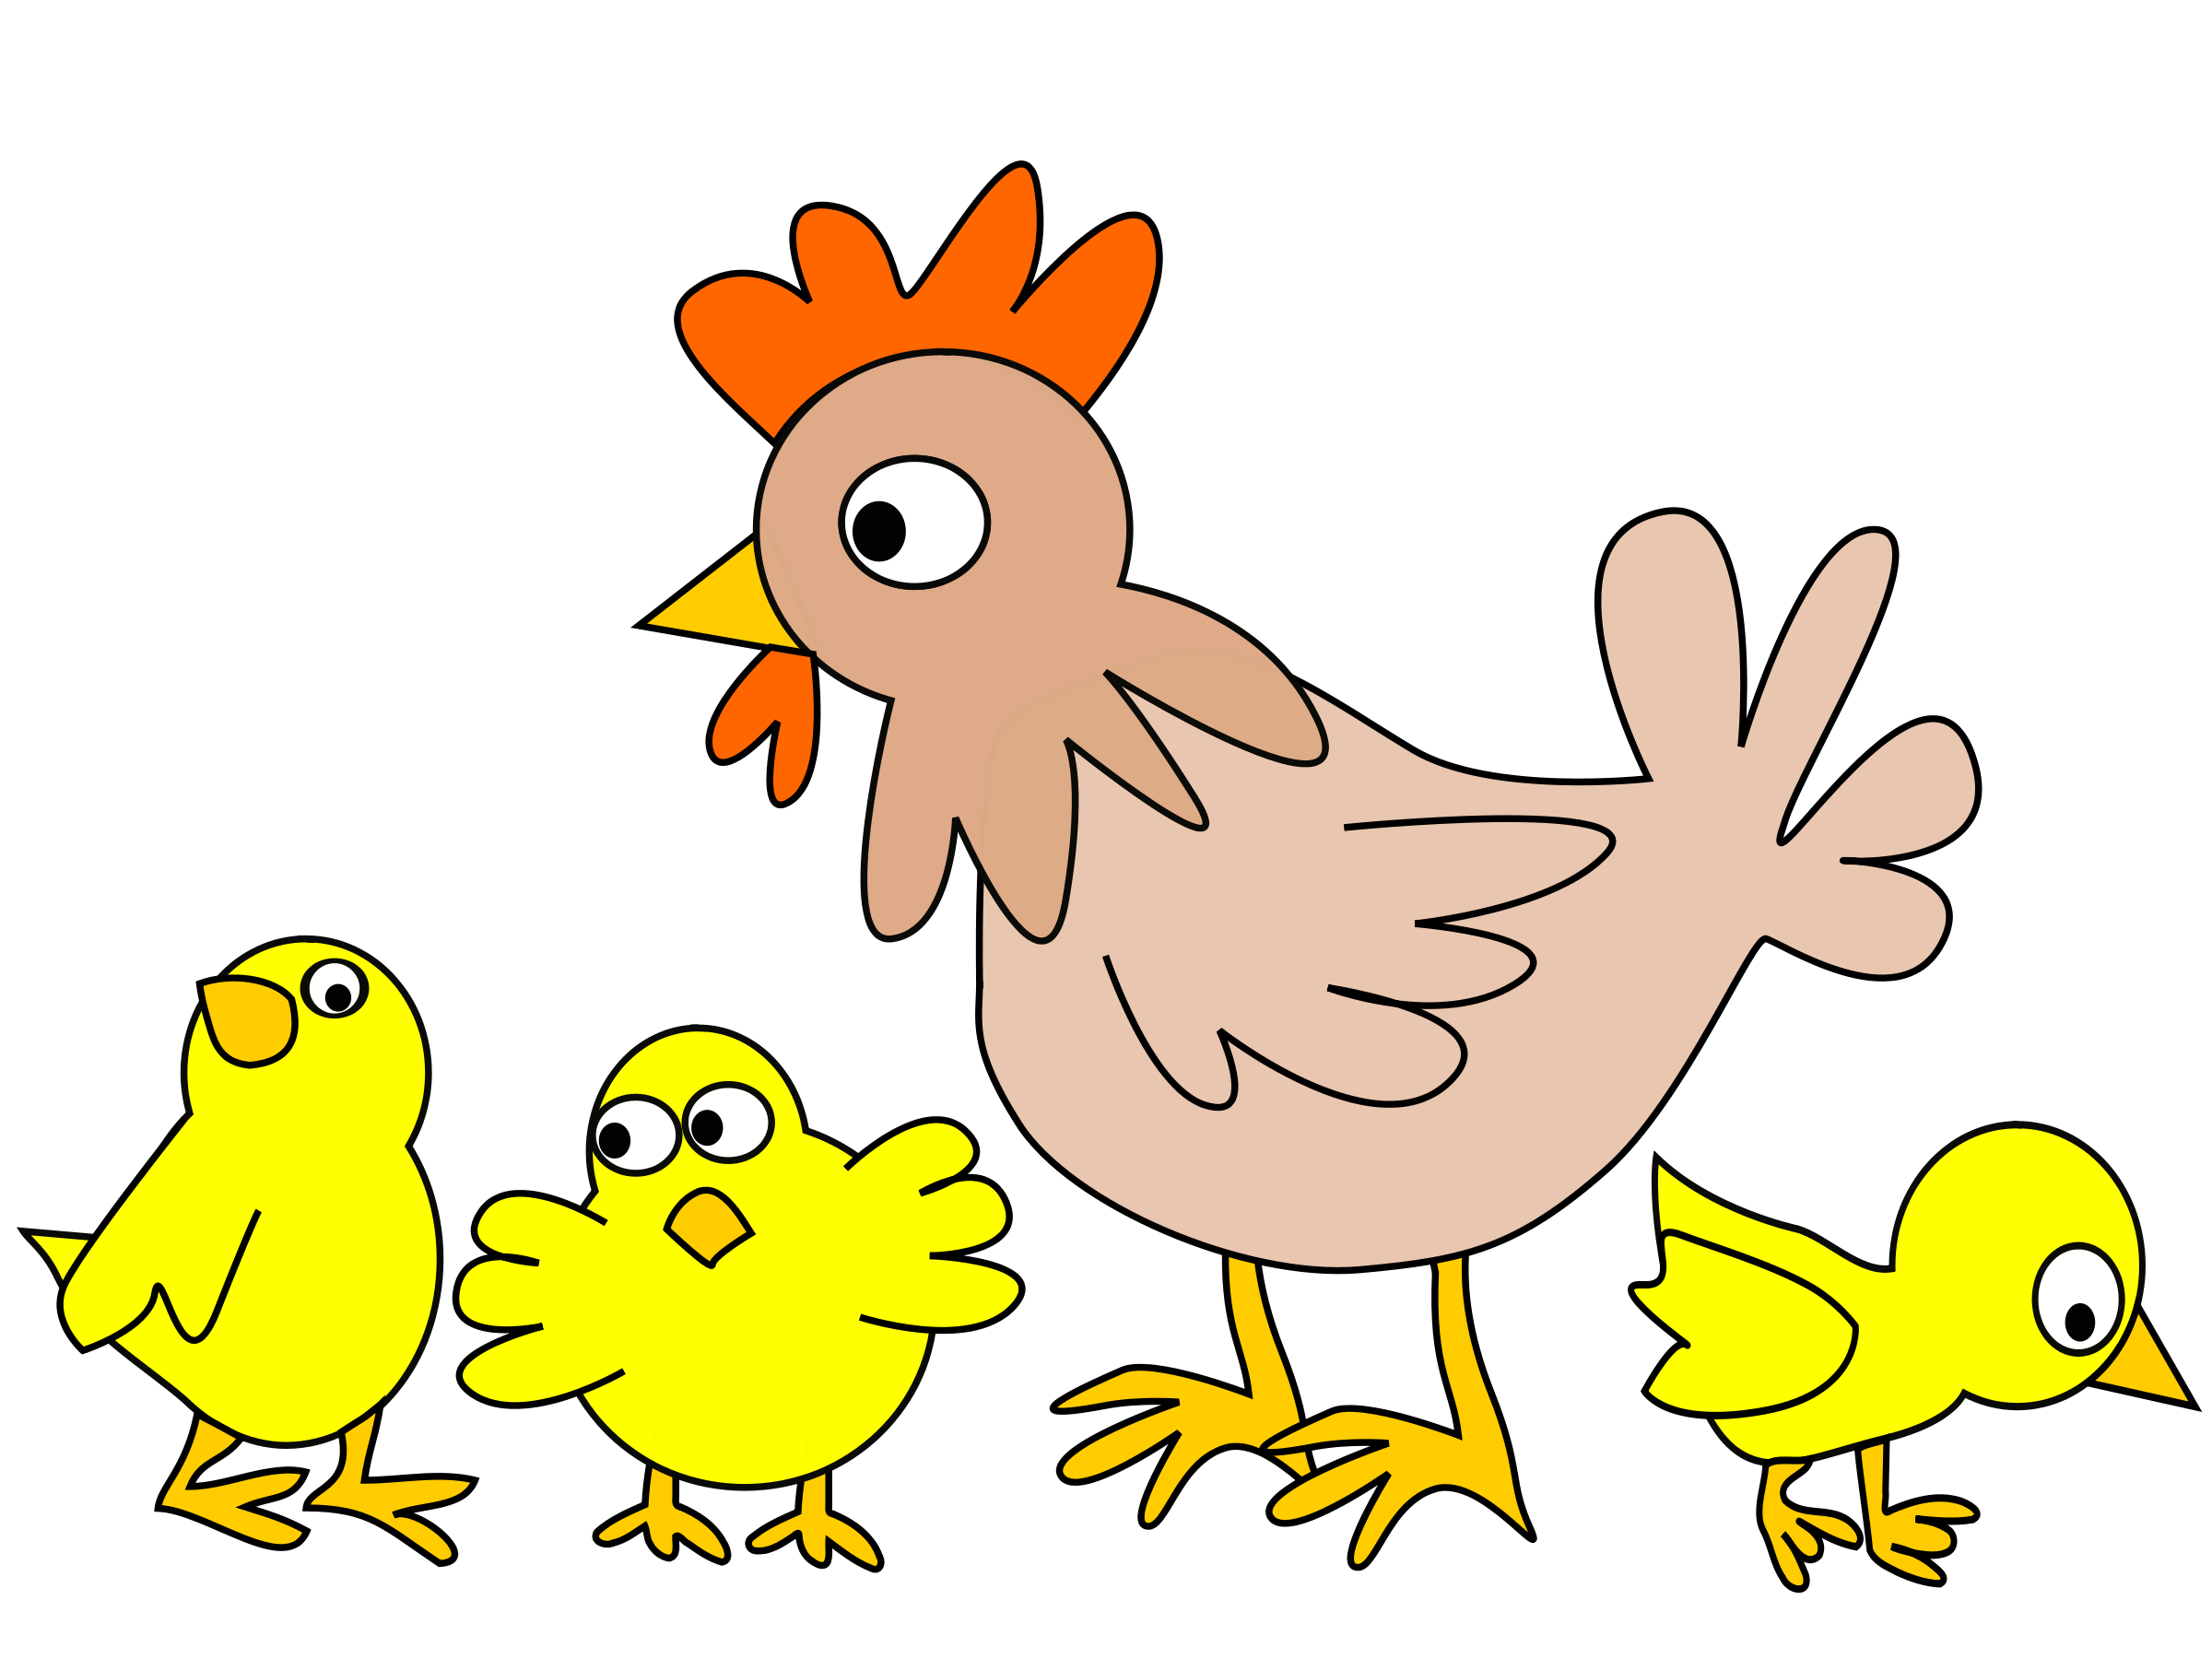 Mad clipart chicken. Egg panda free images